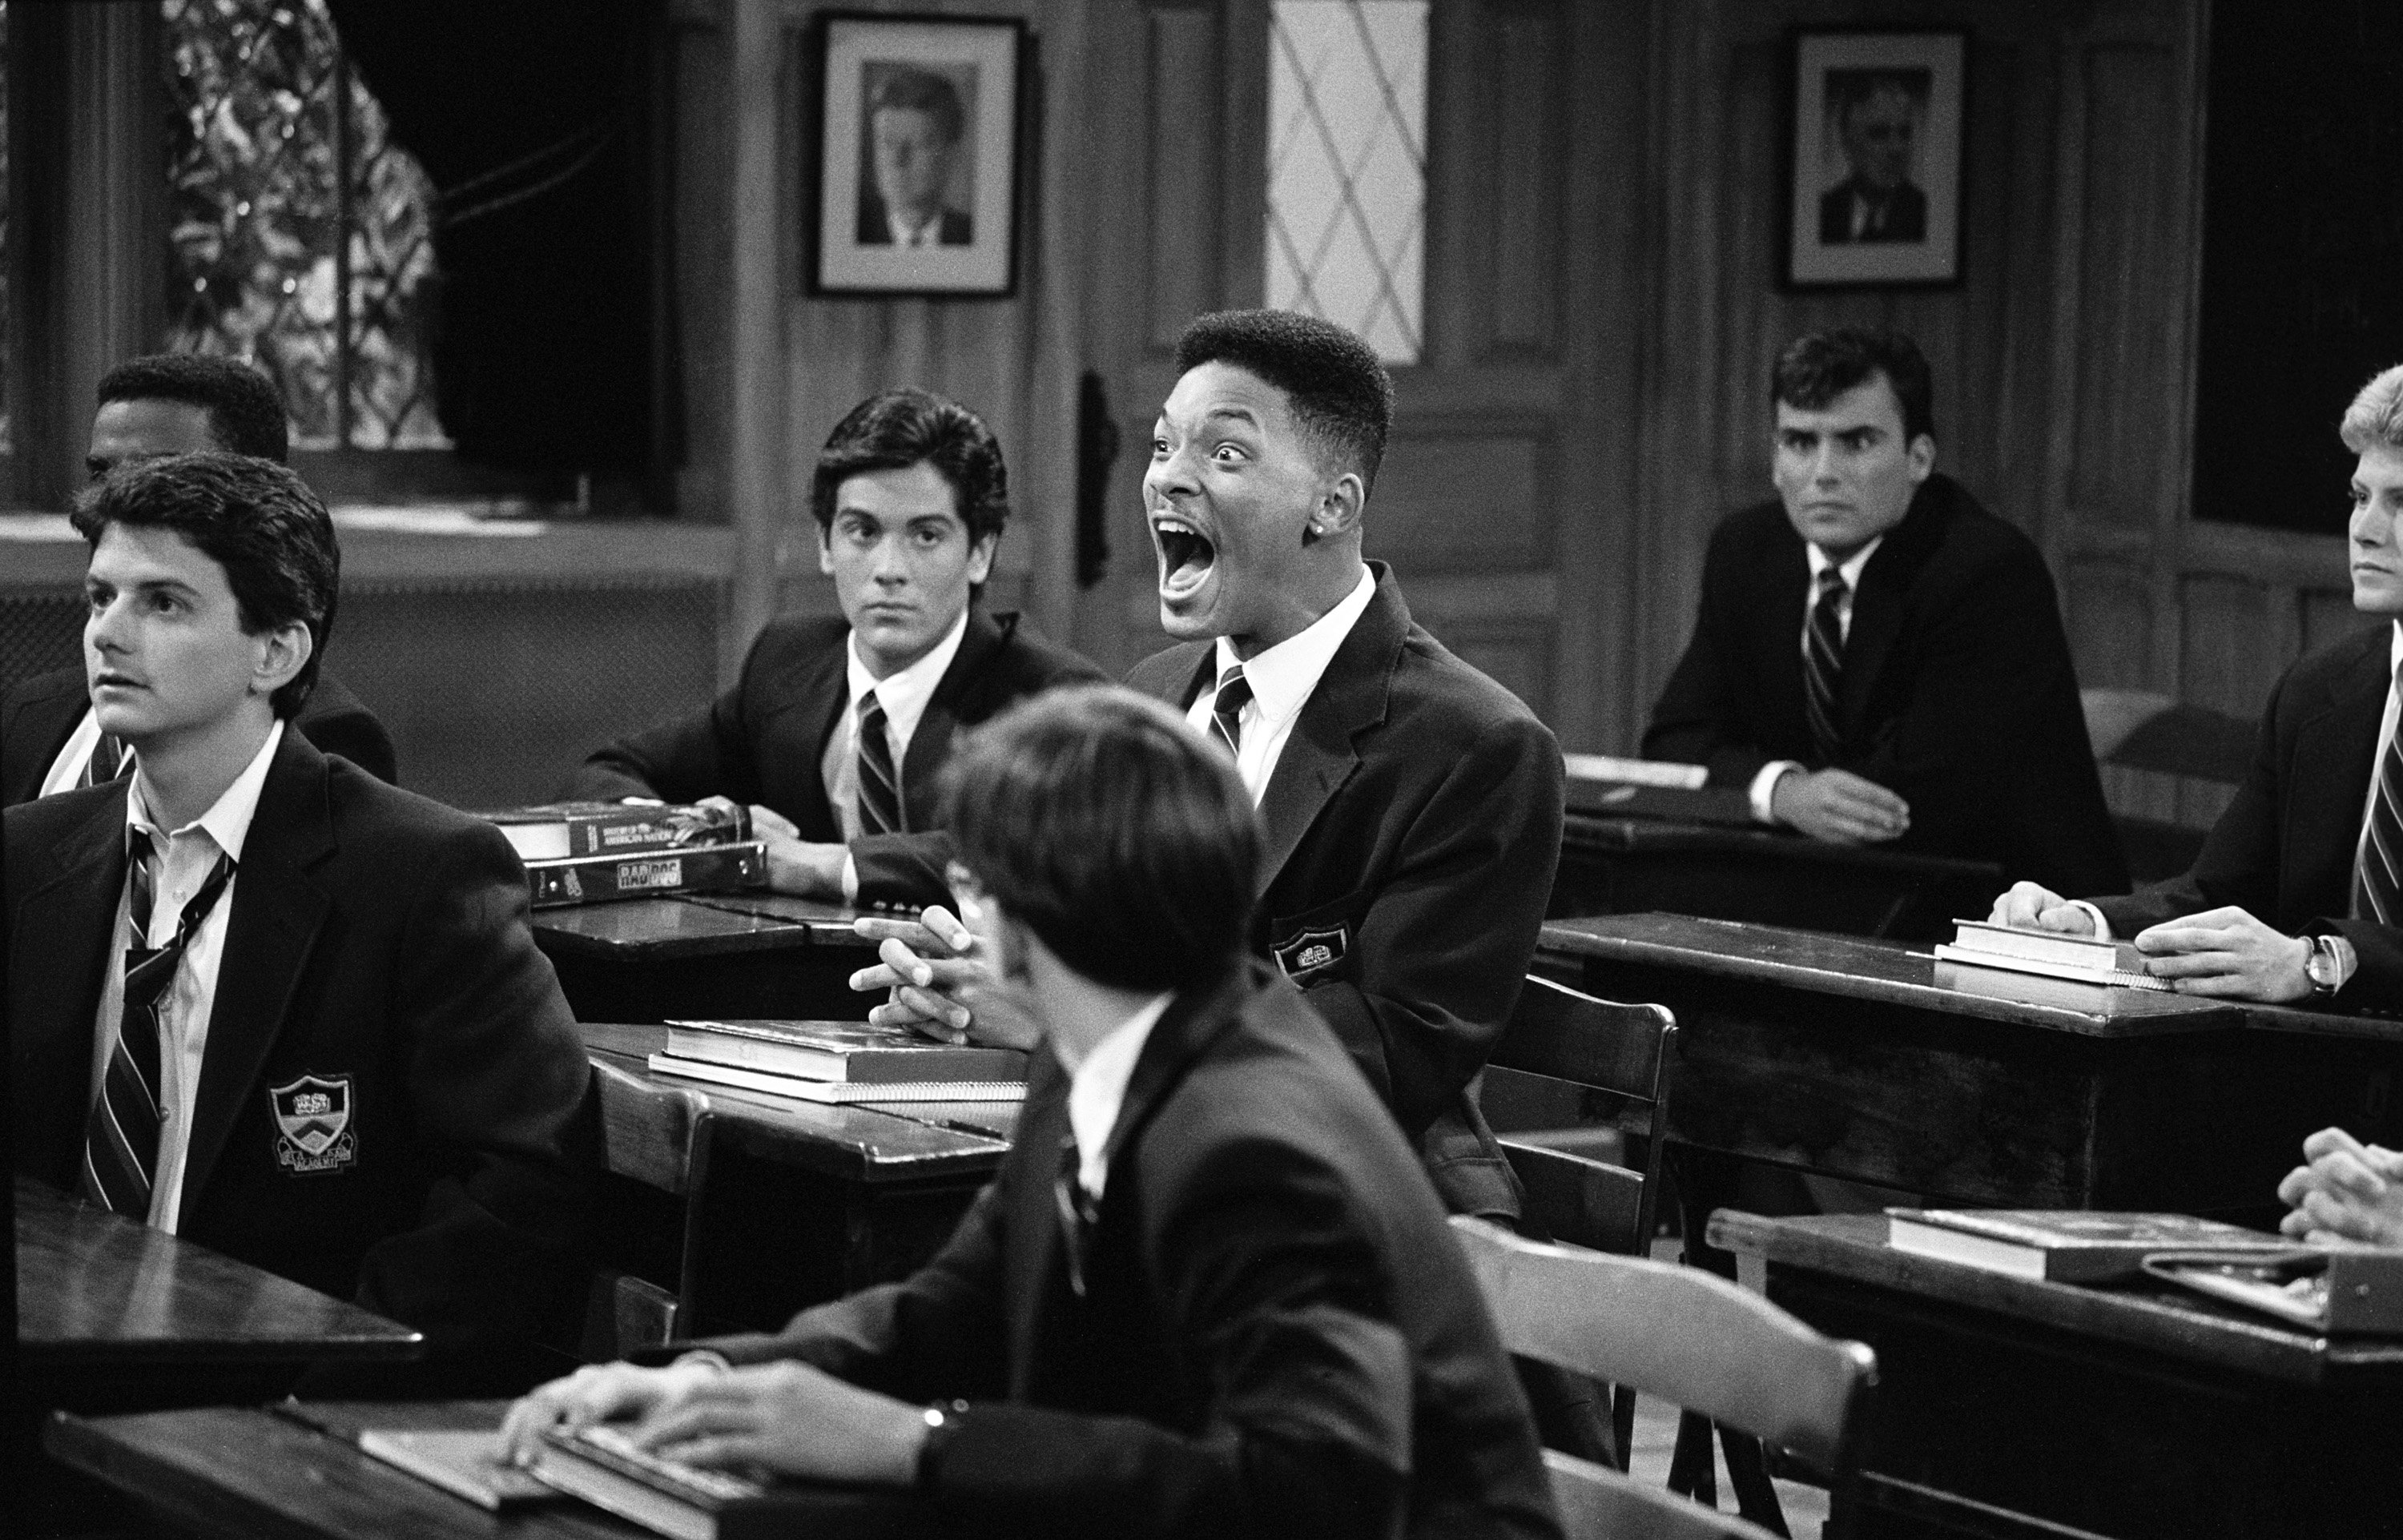 Will Smith screaming in class during an episode of 'The Fresh Prince of Bel-Air'